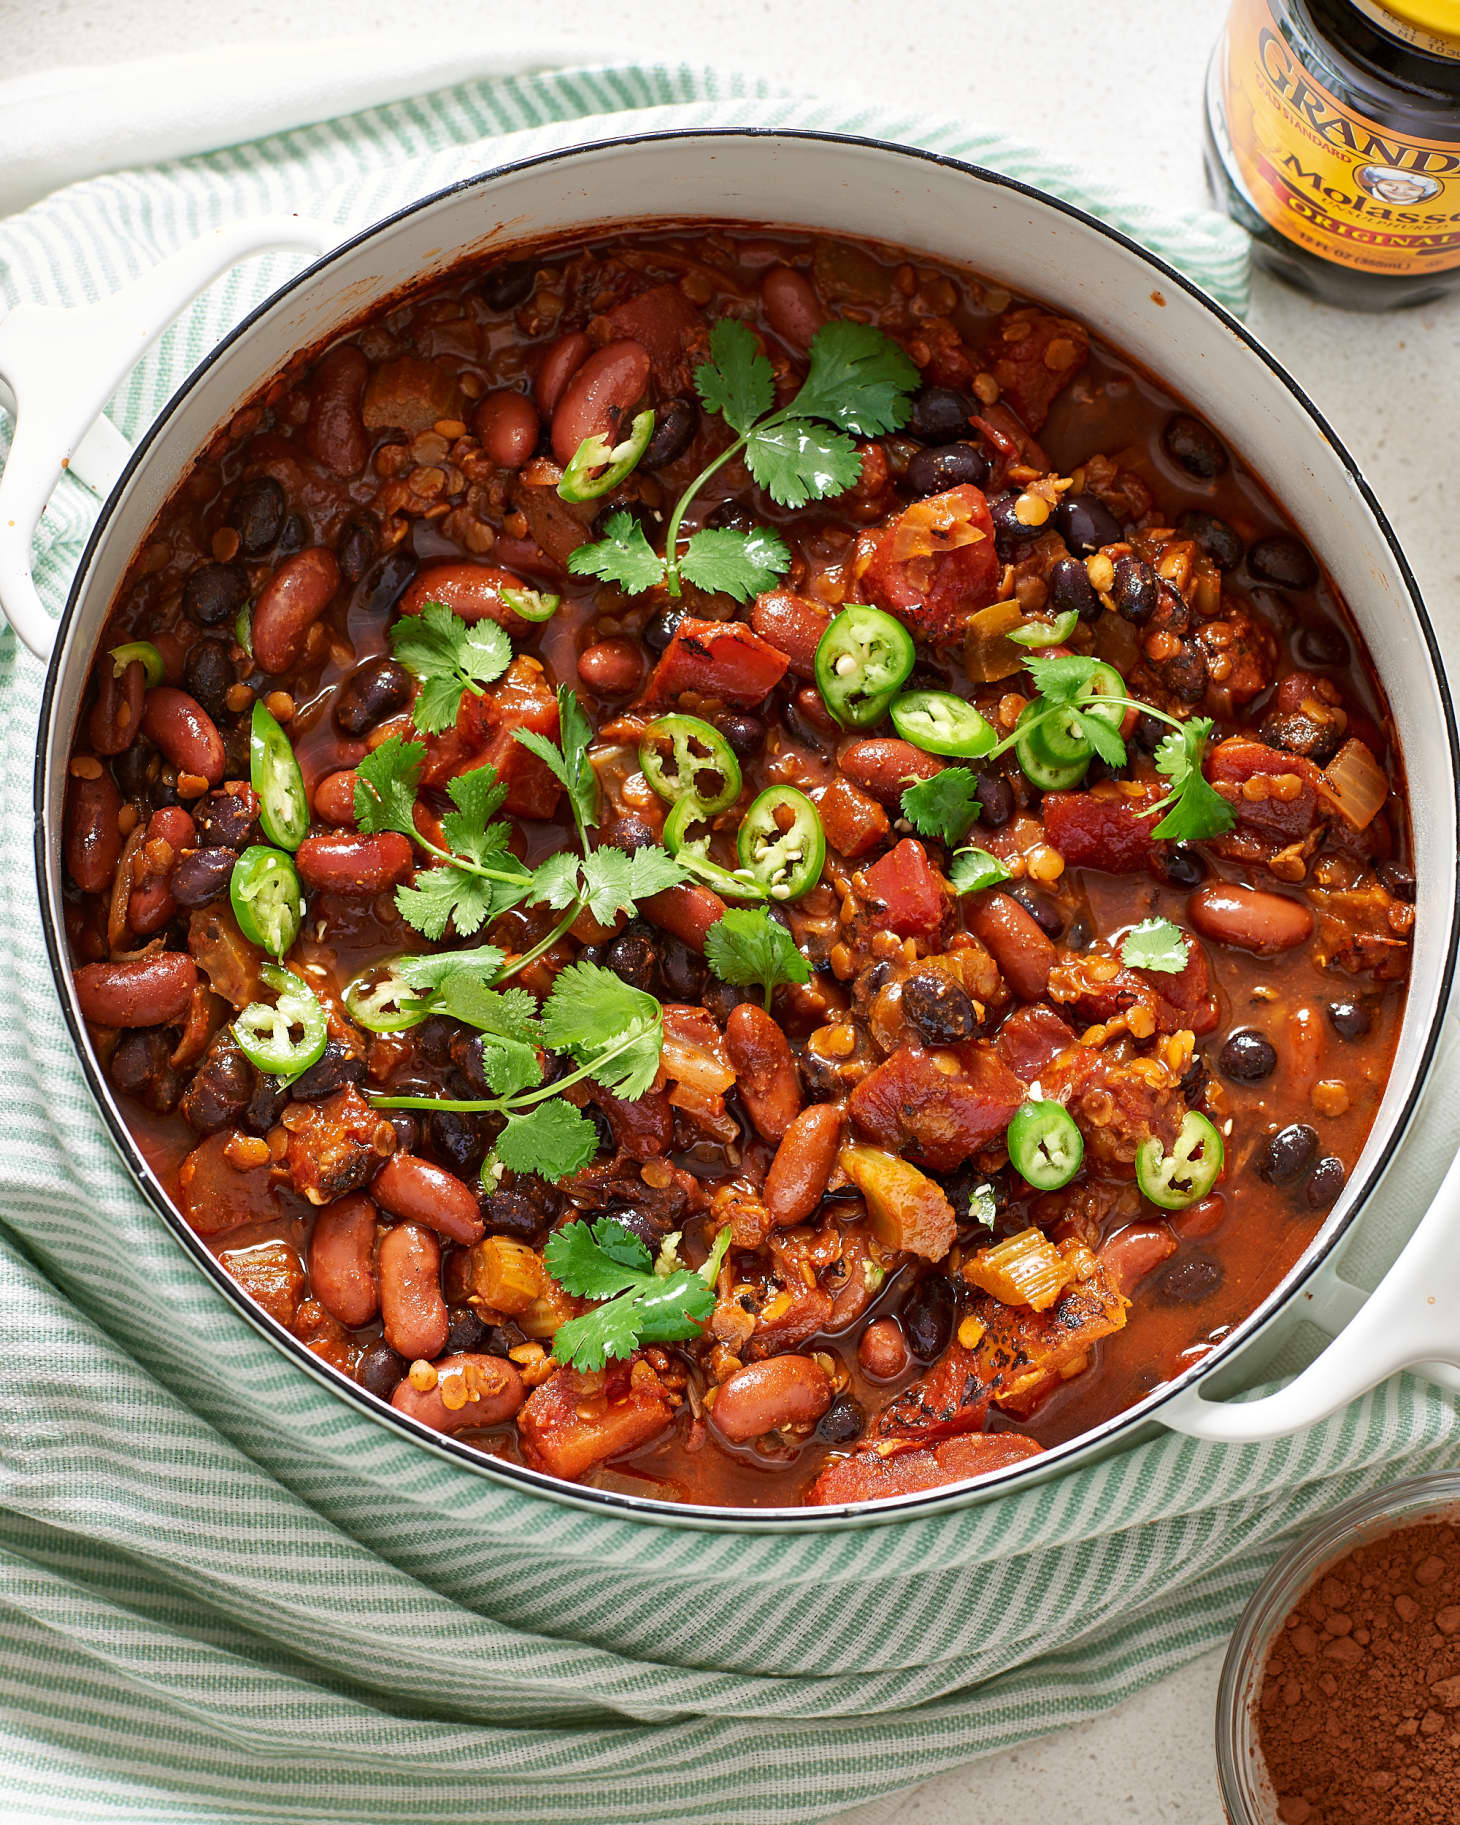 What Goes Good With Chili? The Amazing Answer Might Surprise You